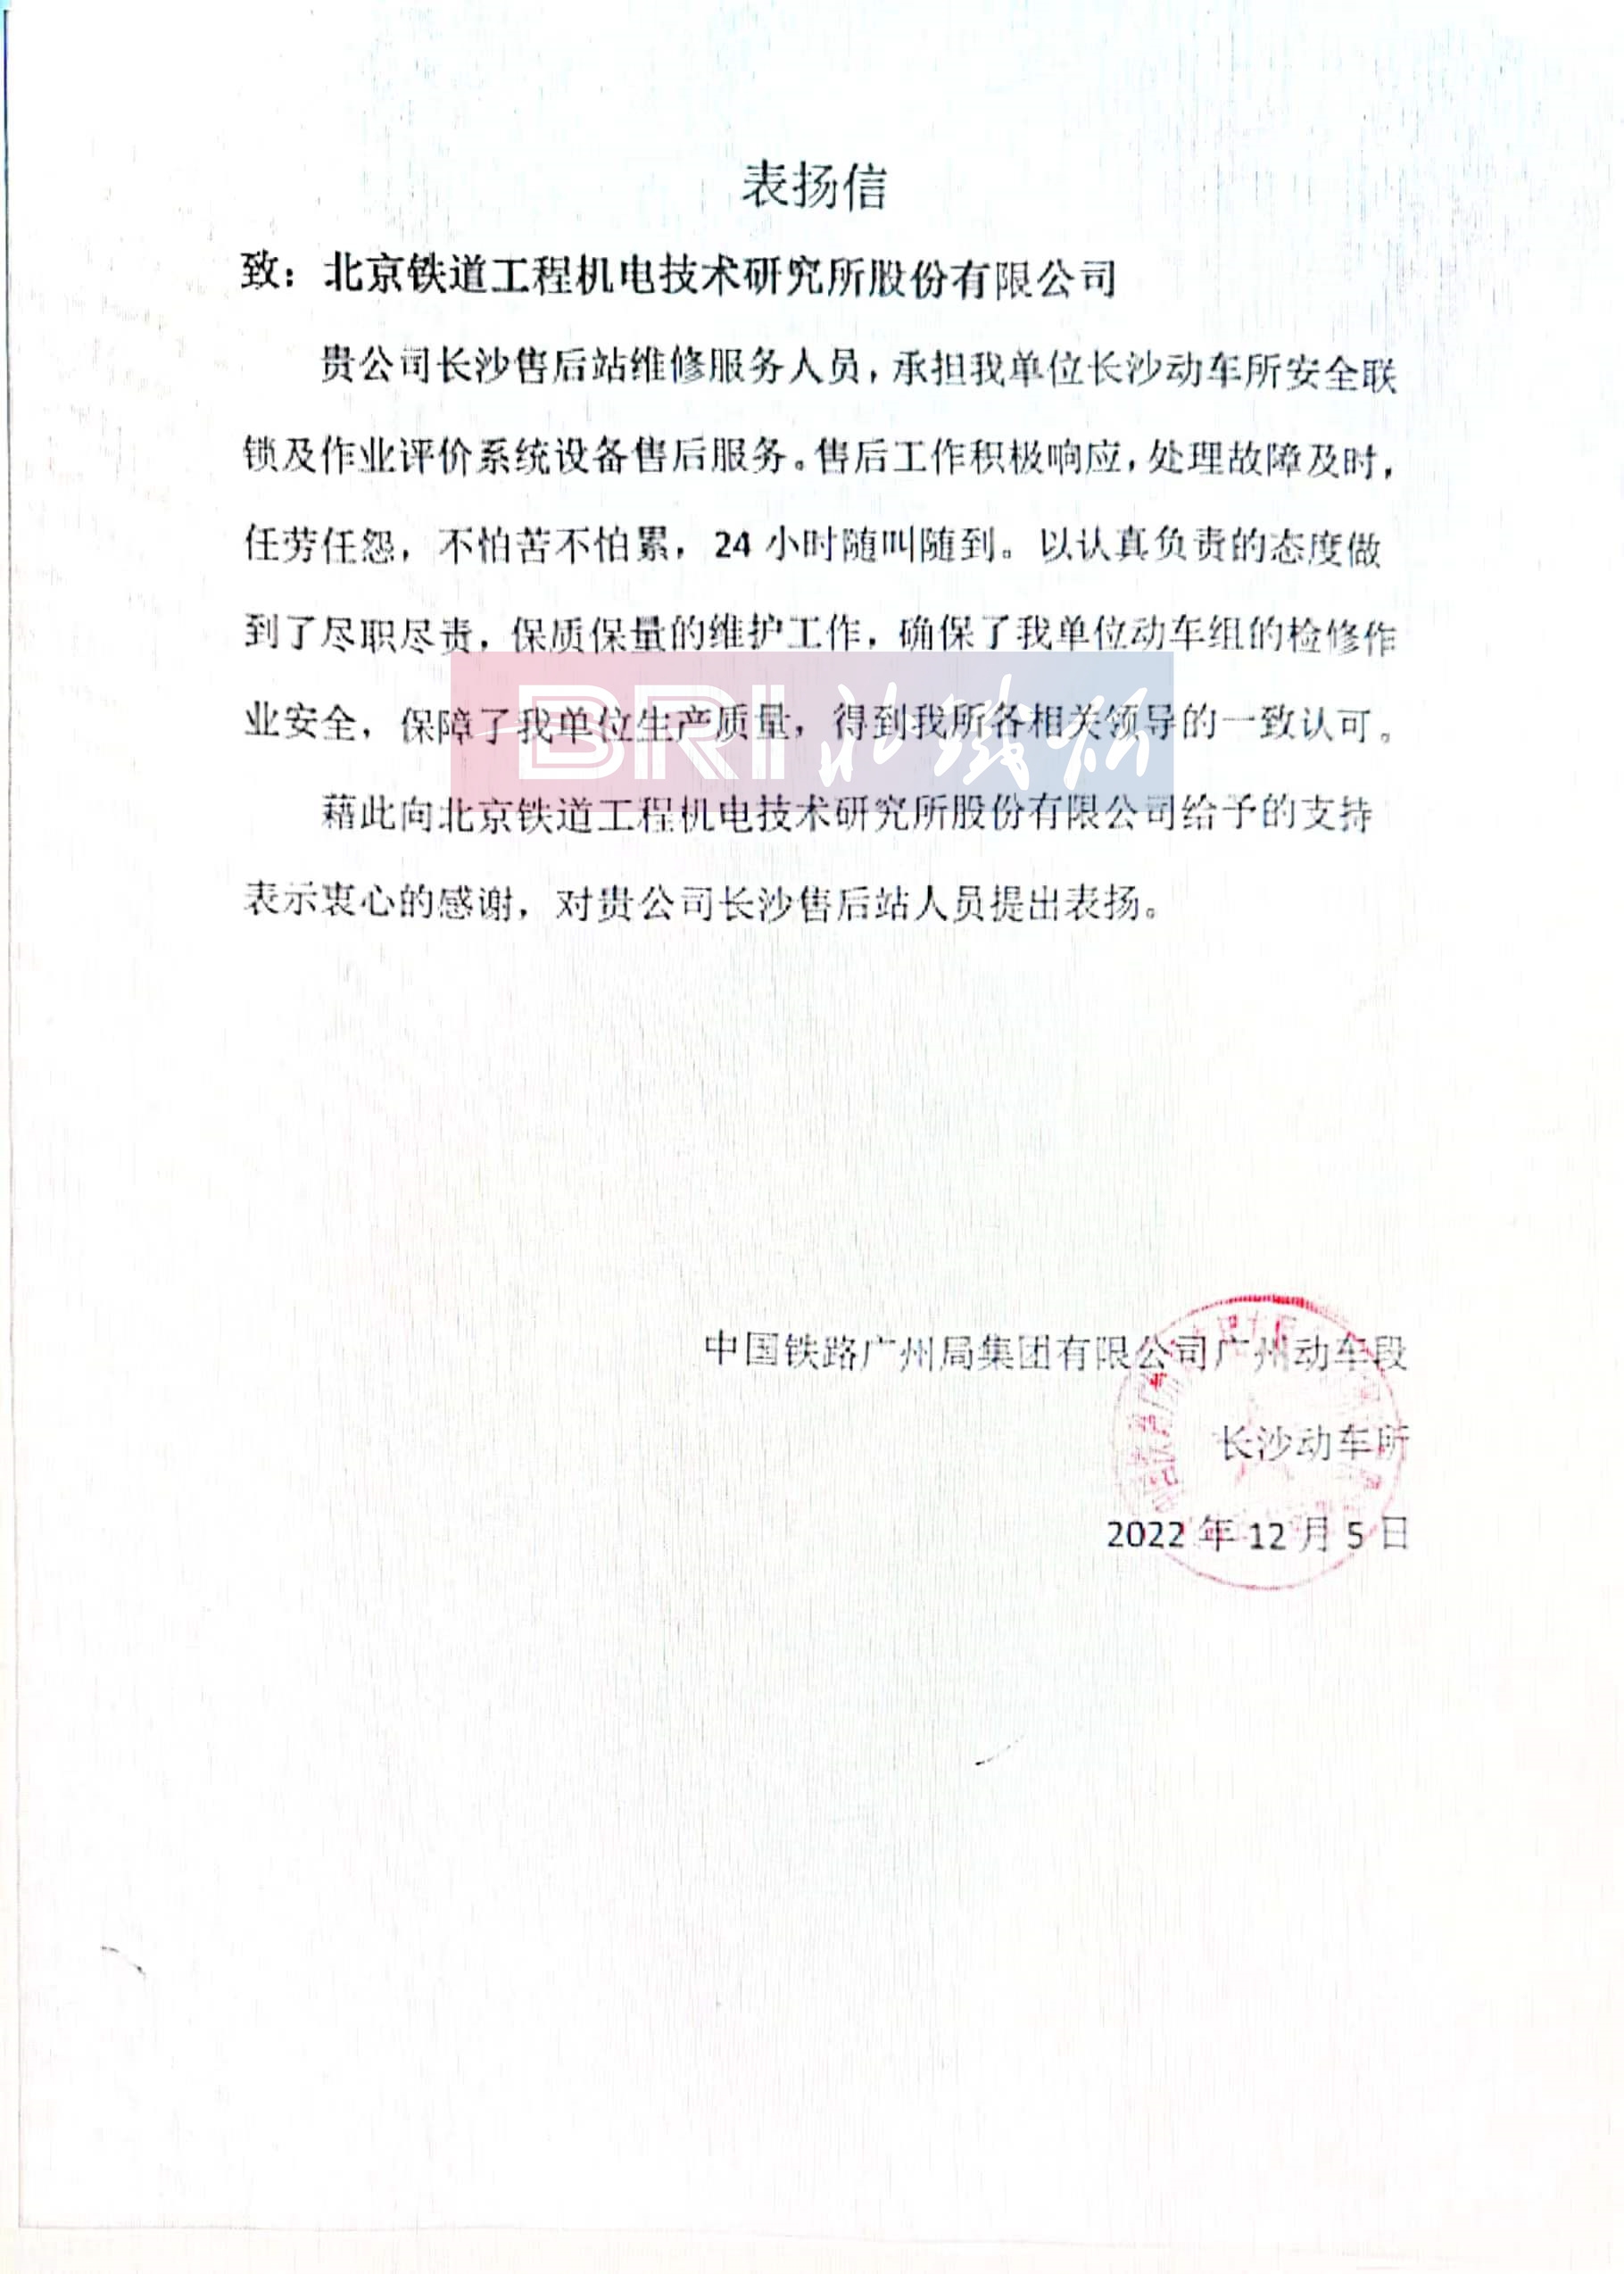 The commendation letter from Changsha EMU Station